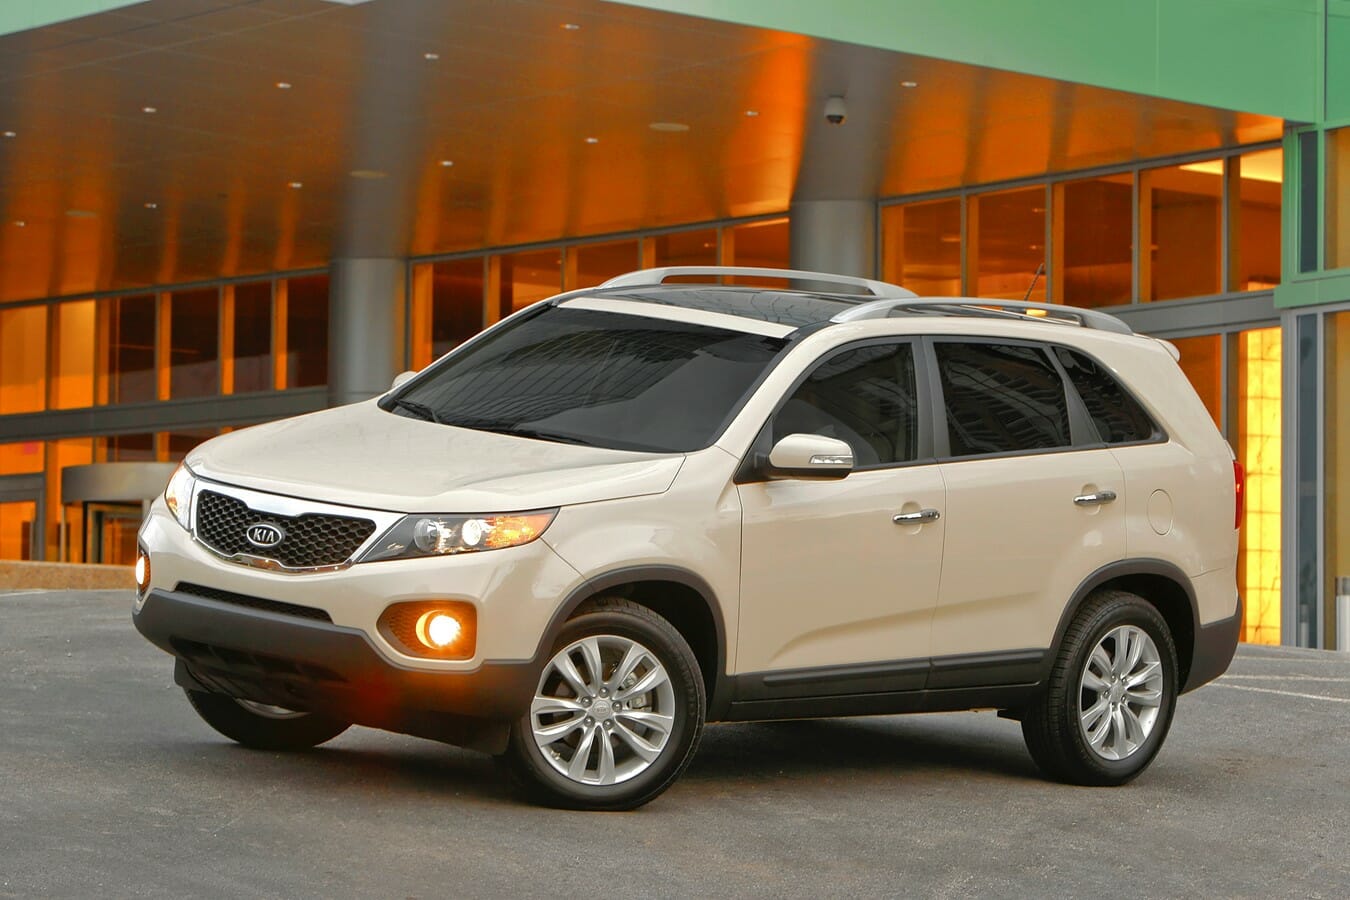 2011 Kia Sorento’s Problems with Sudden Surging and Engine Stalls Led to Seven Investigations, Six Recalls